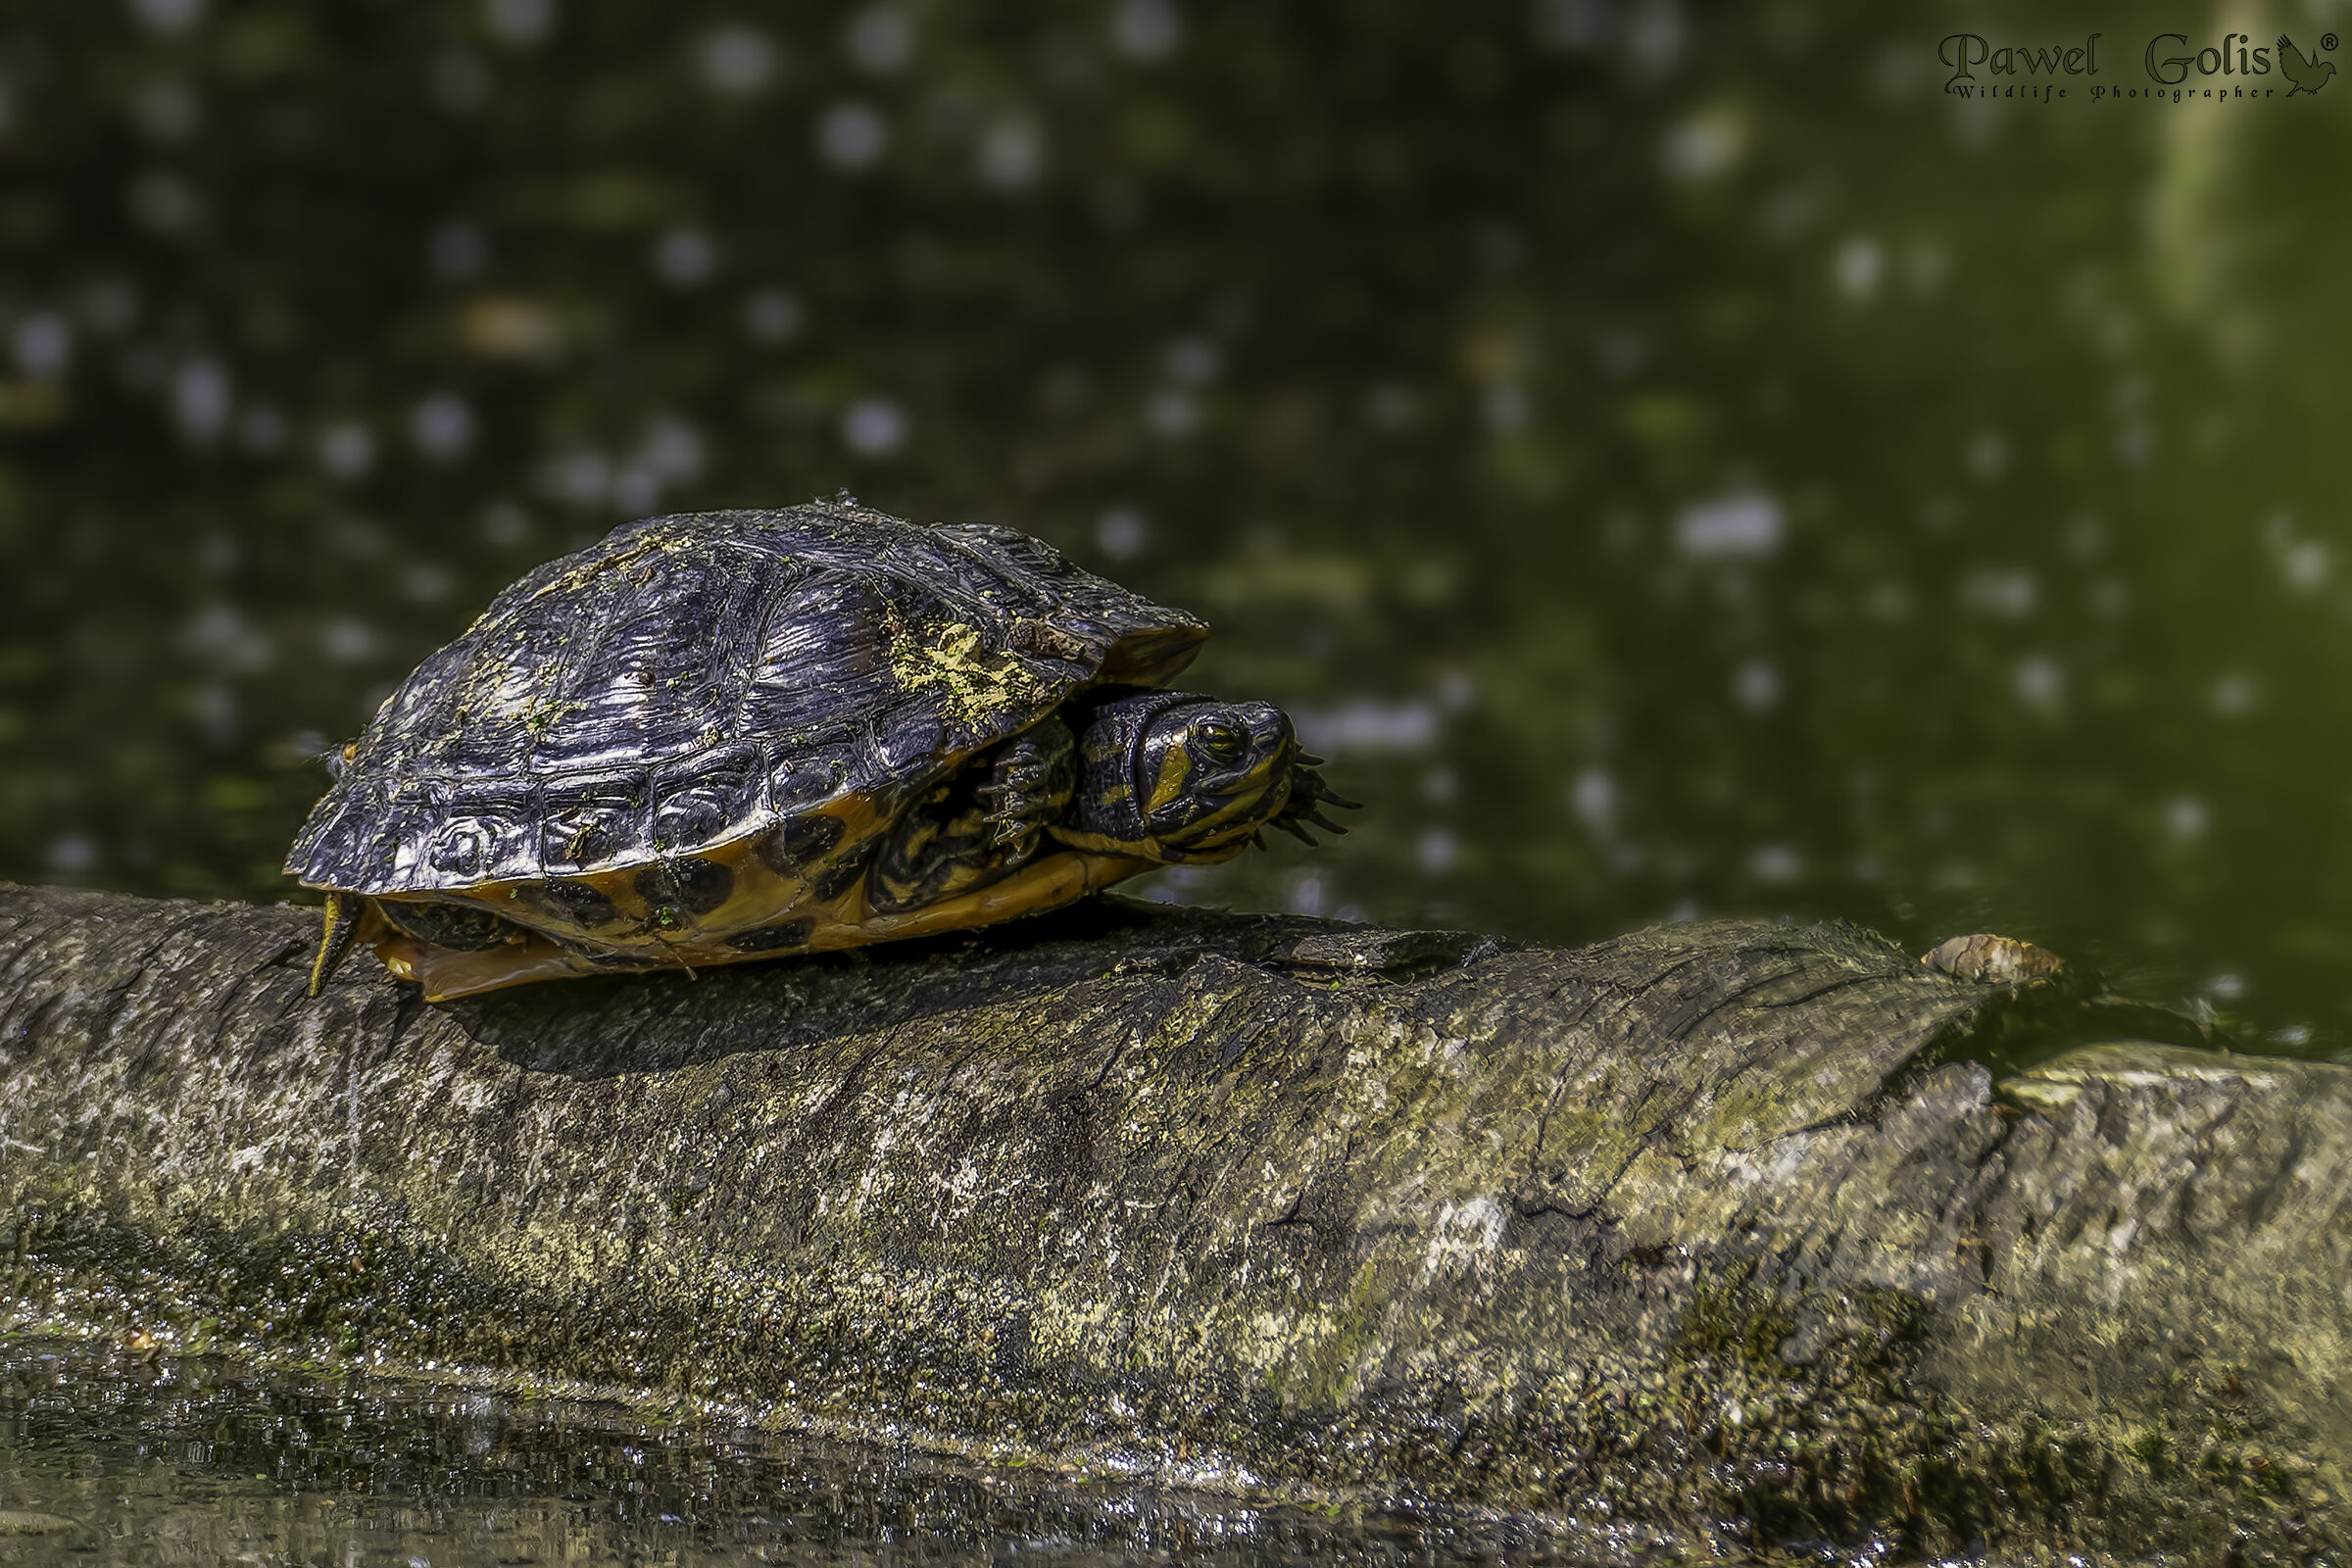 The river cooter (Pseudemys concinna)...